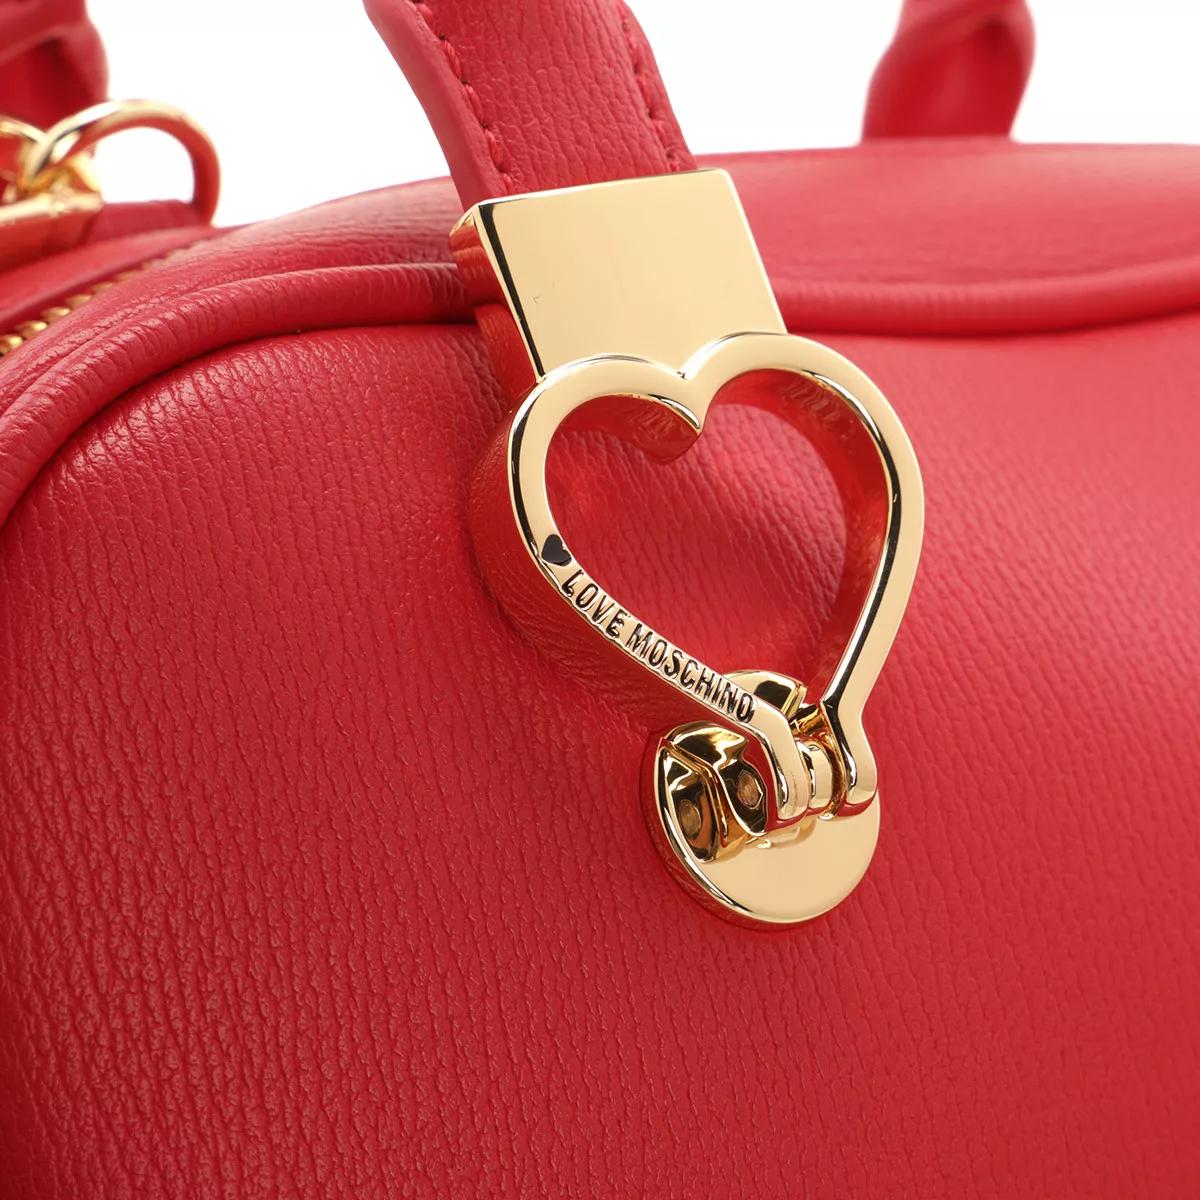 Love Moschino Satchels Borsa Pu Rosso in rood